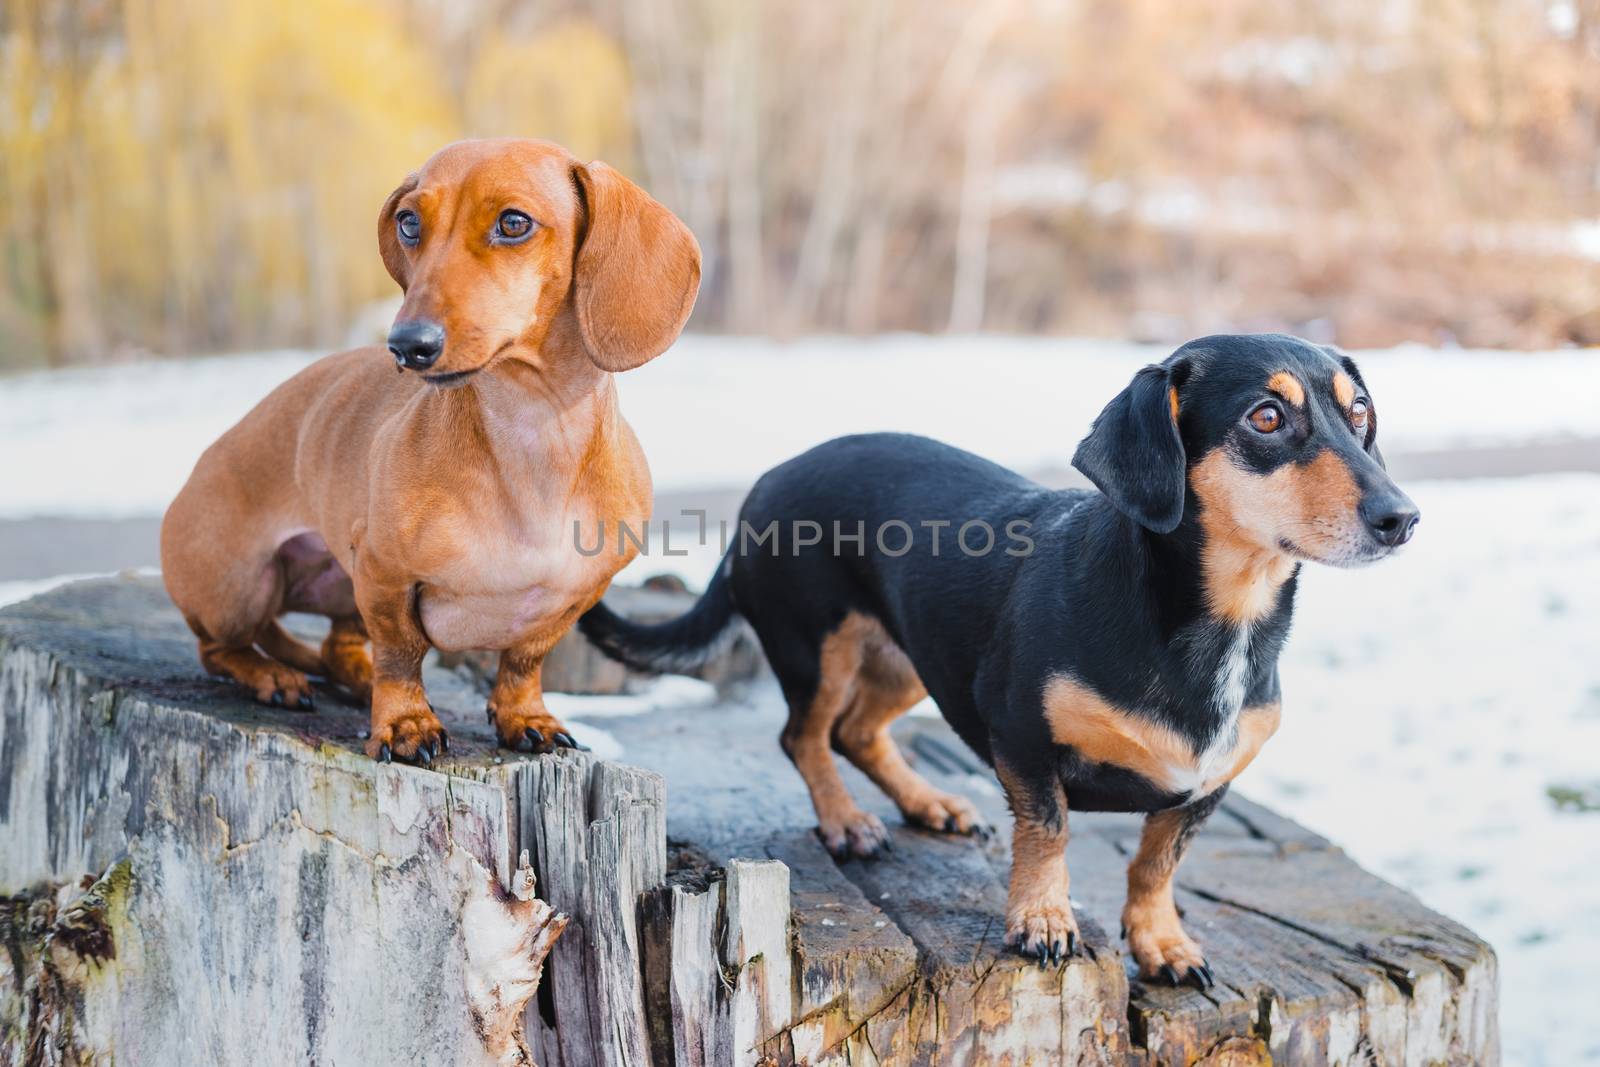 Two cute dachshund dogs outdoors. Portrait of lovely dogs at a park in cold winter season